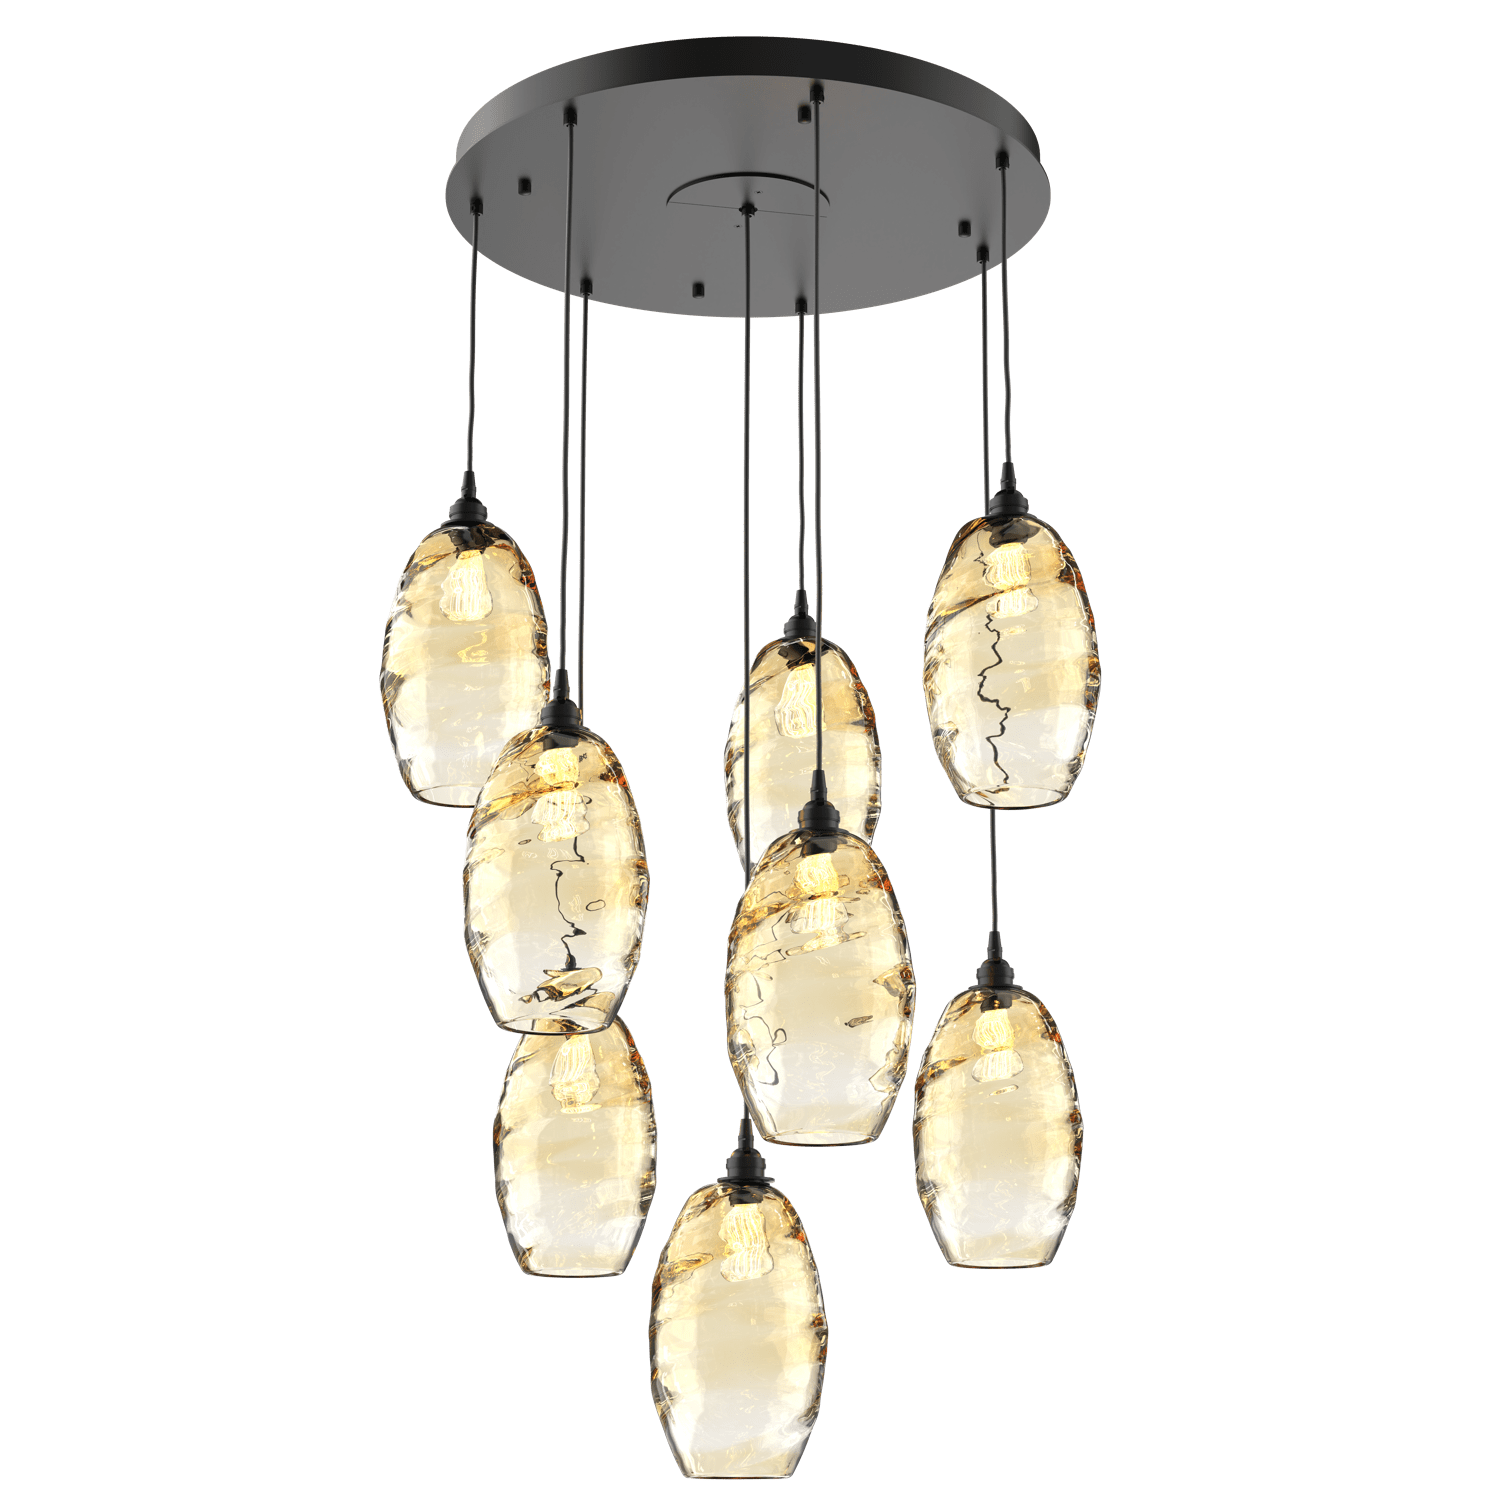 CHB0035-08-MB-OA-Hammerton-Studio-Optic-Blown-Glass-Elisse-8-light-round-pendant-chandelier-with-matte-black-finish-and-optic-amber-blown-glass-shades-and-incandescent-lamping